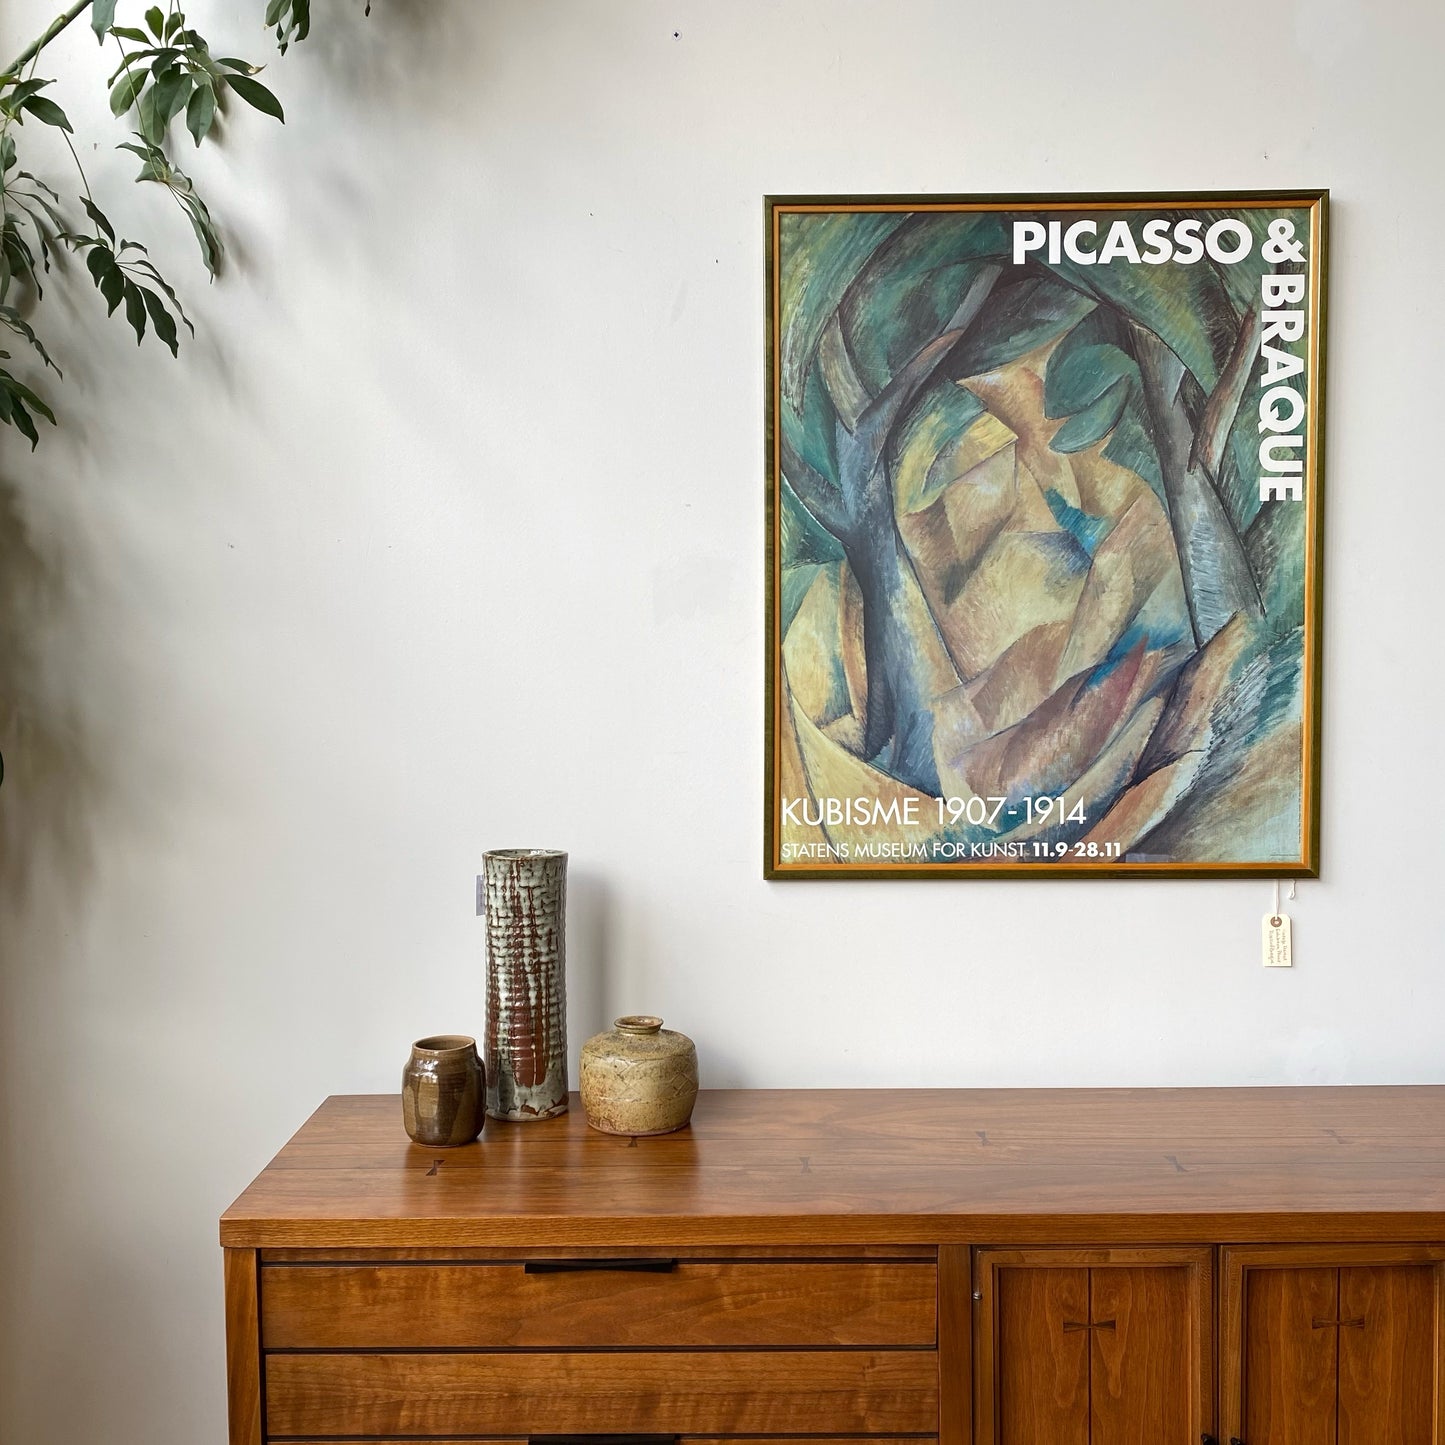 Vintage Framed Picasso & Braque Exhibition Poster Print